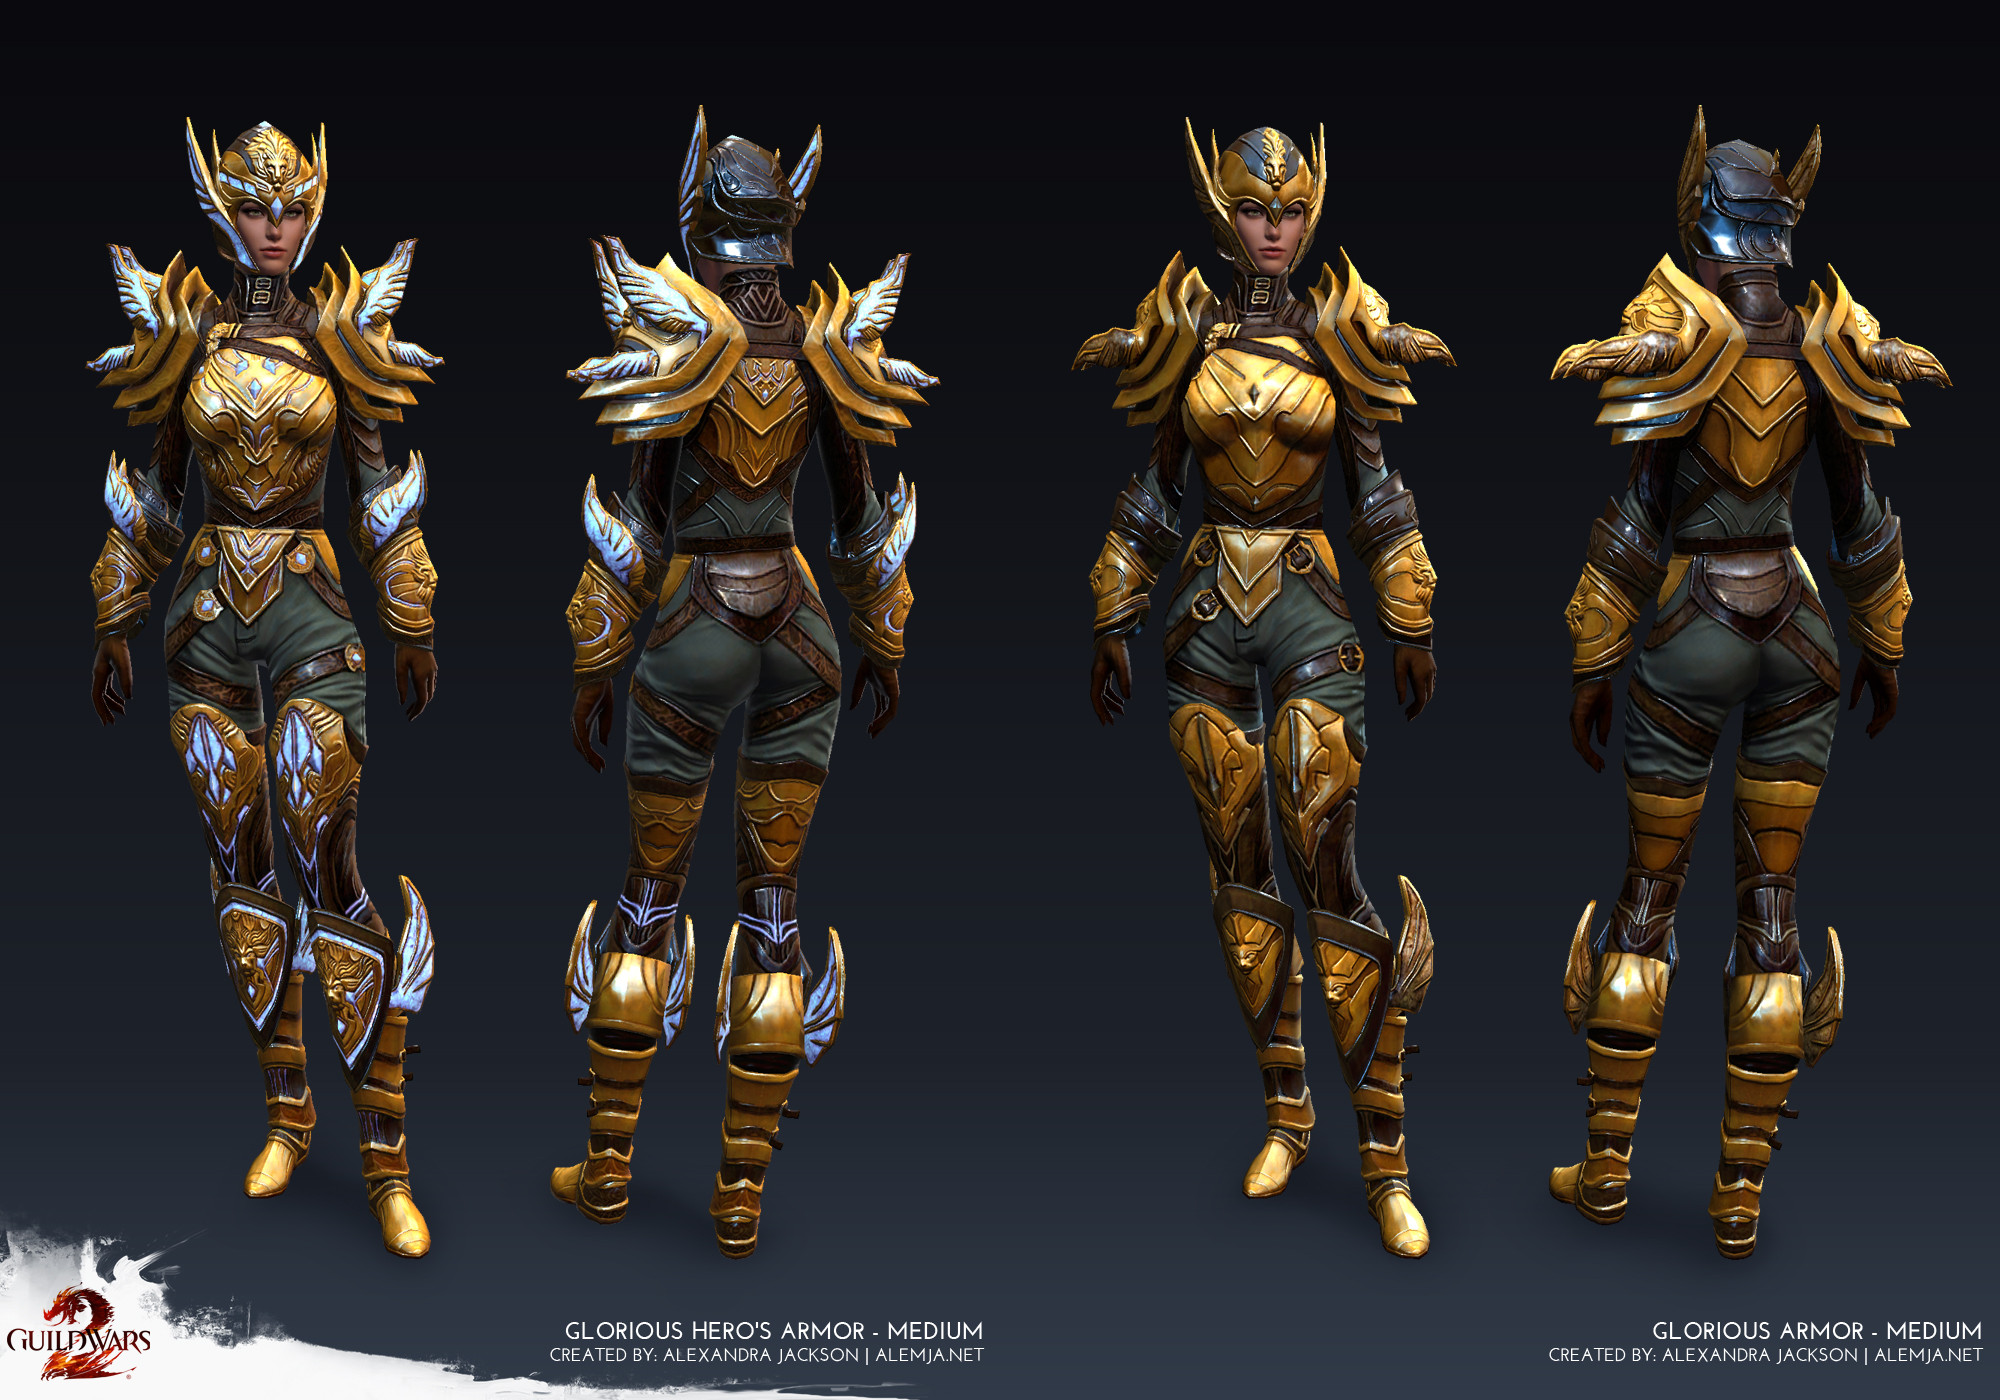 Worked on the armor game ready model and texures. I made sure as much as possible was reused as possible between the 2 tiers. This set was added as a reward tier for PvP